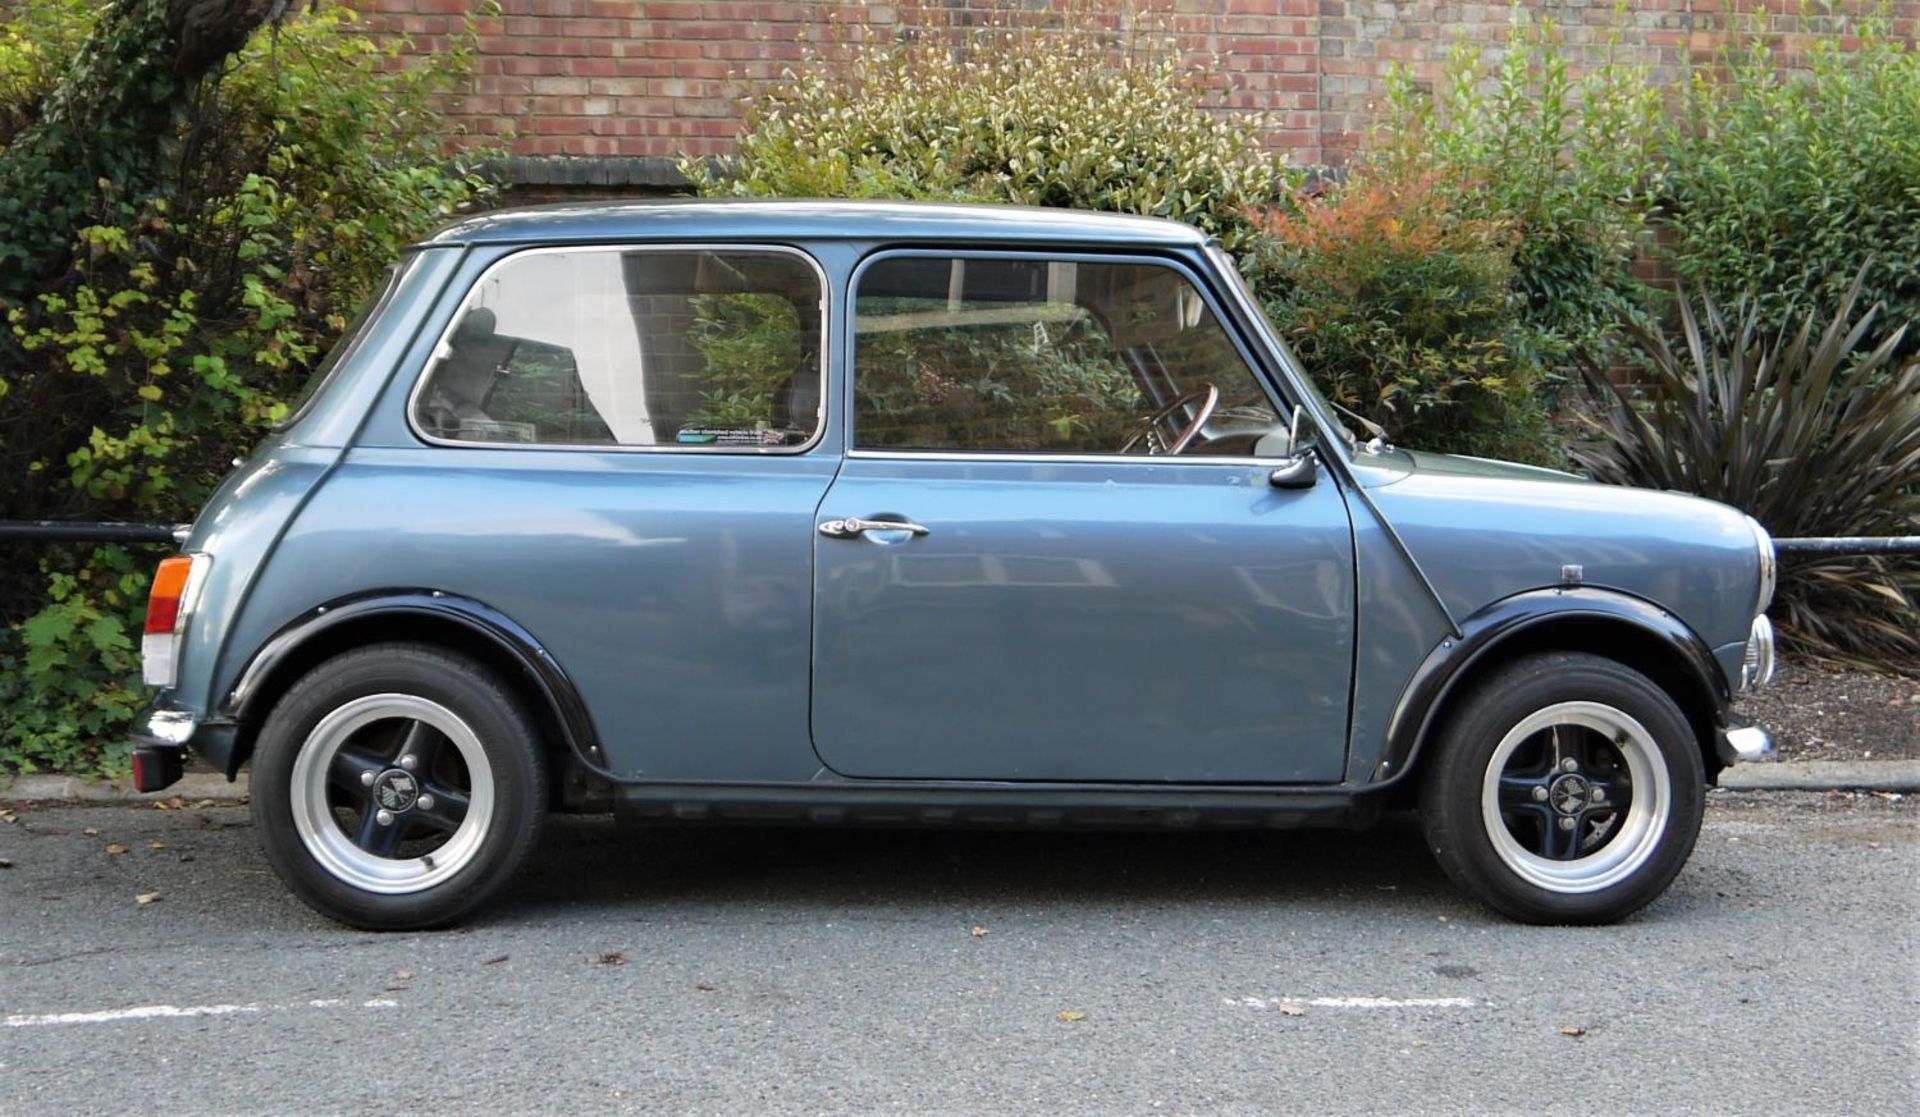 1991 ROVER MINI NEON Registration Number: J774 NWD Recorded Mileage: 58,000 miles Chassis Number: - Image 2 of 24